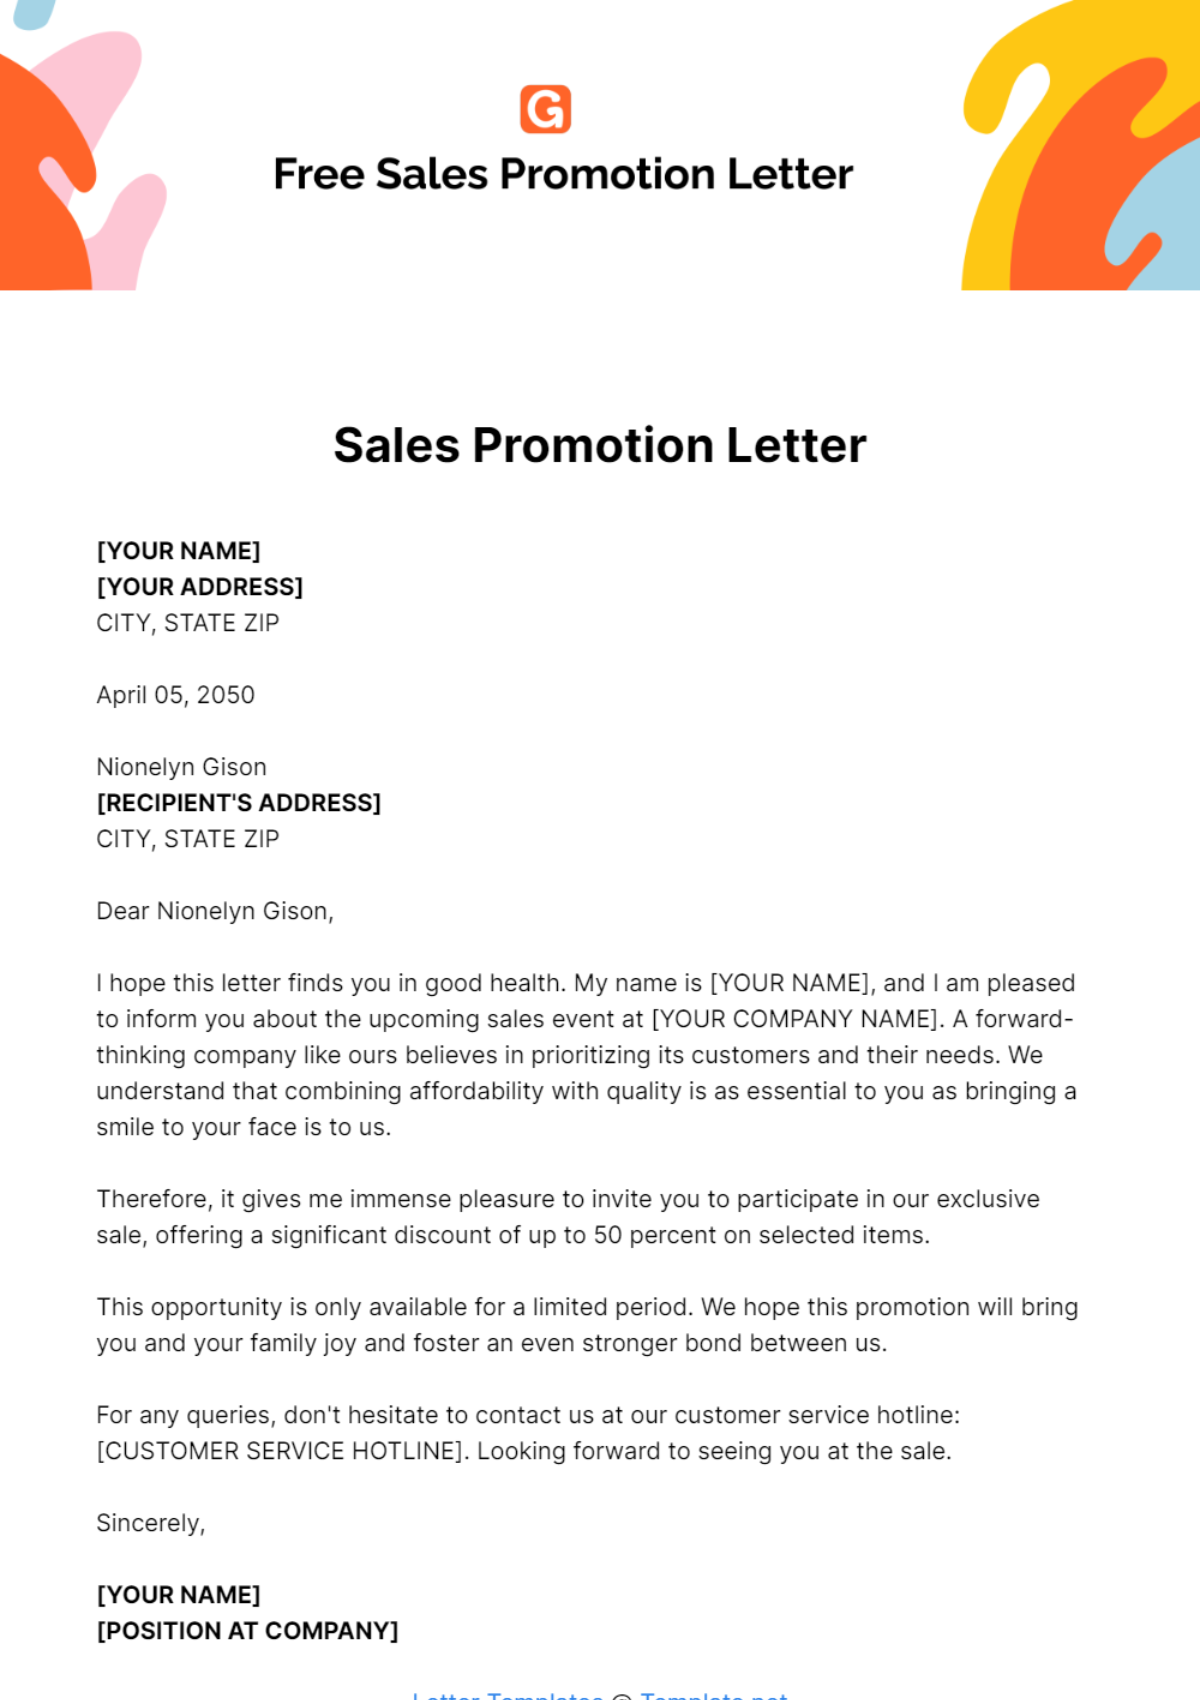 Free Sales Promotion Letter Template